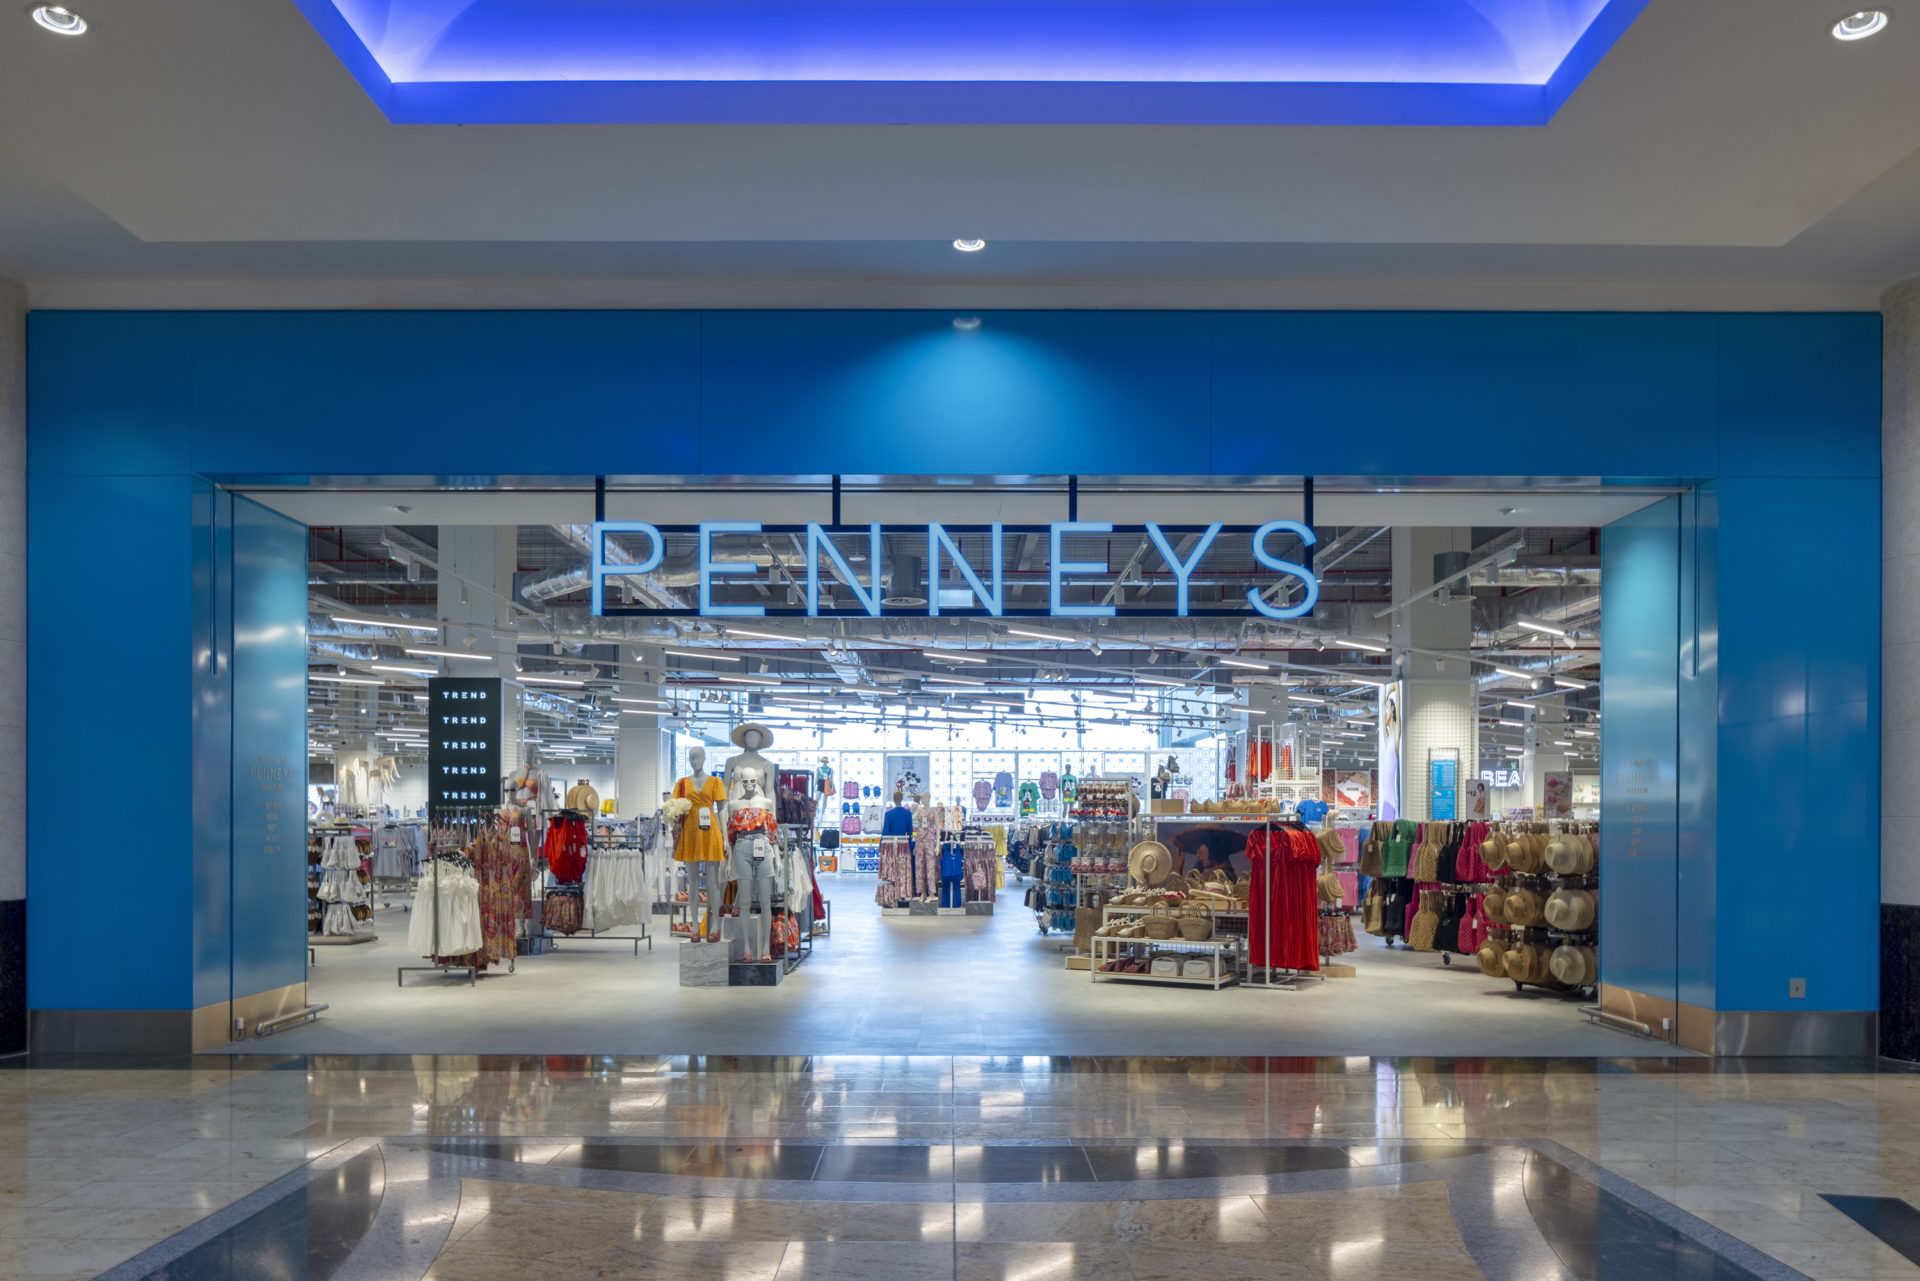 Penneys at Dundrum Town Centre. Image: Penneys